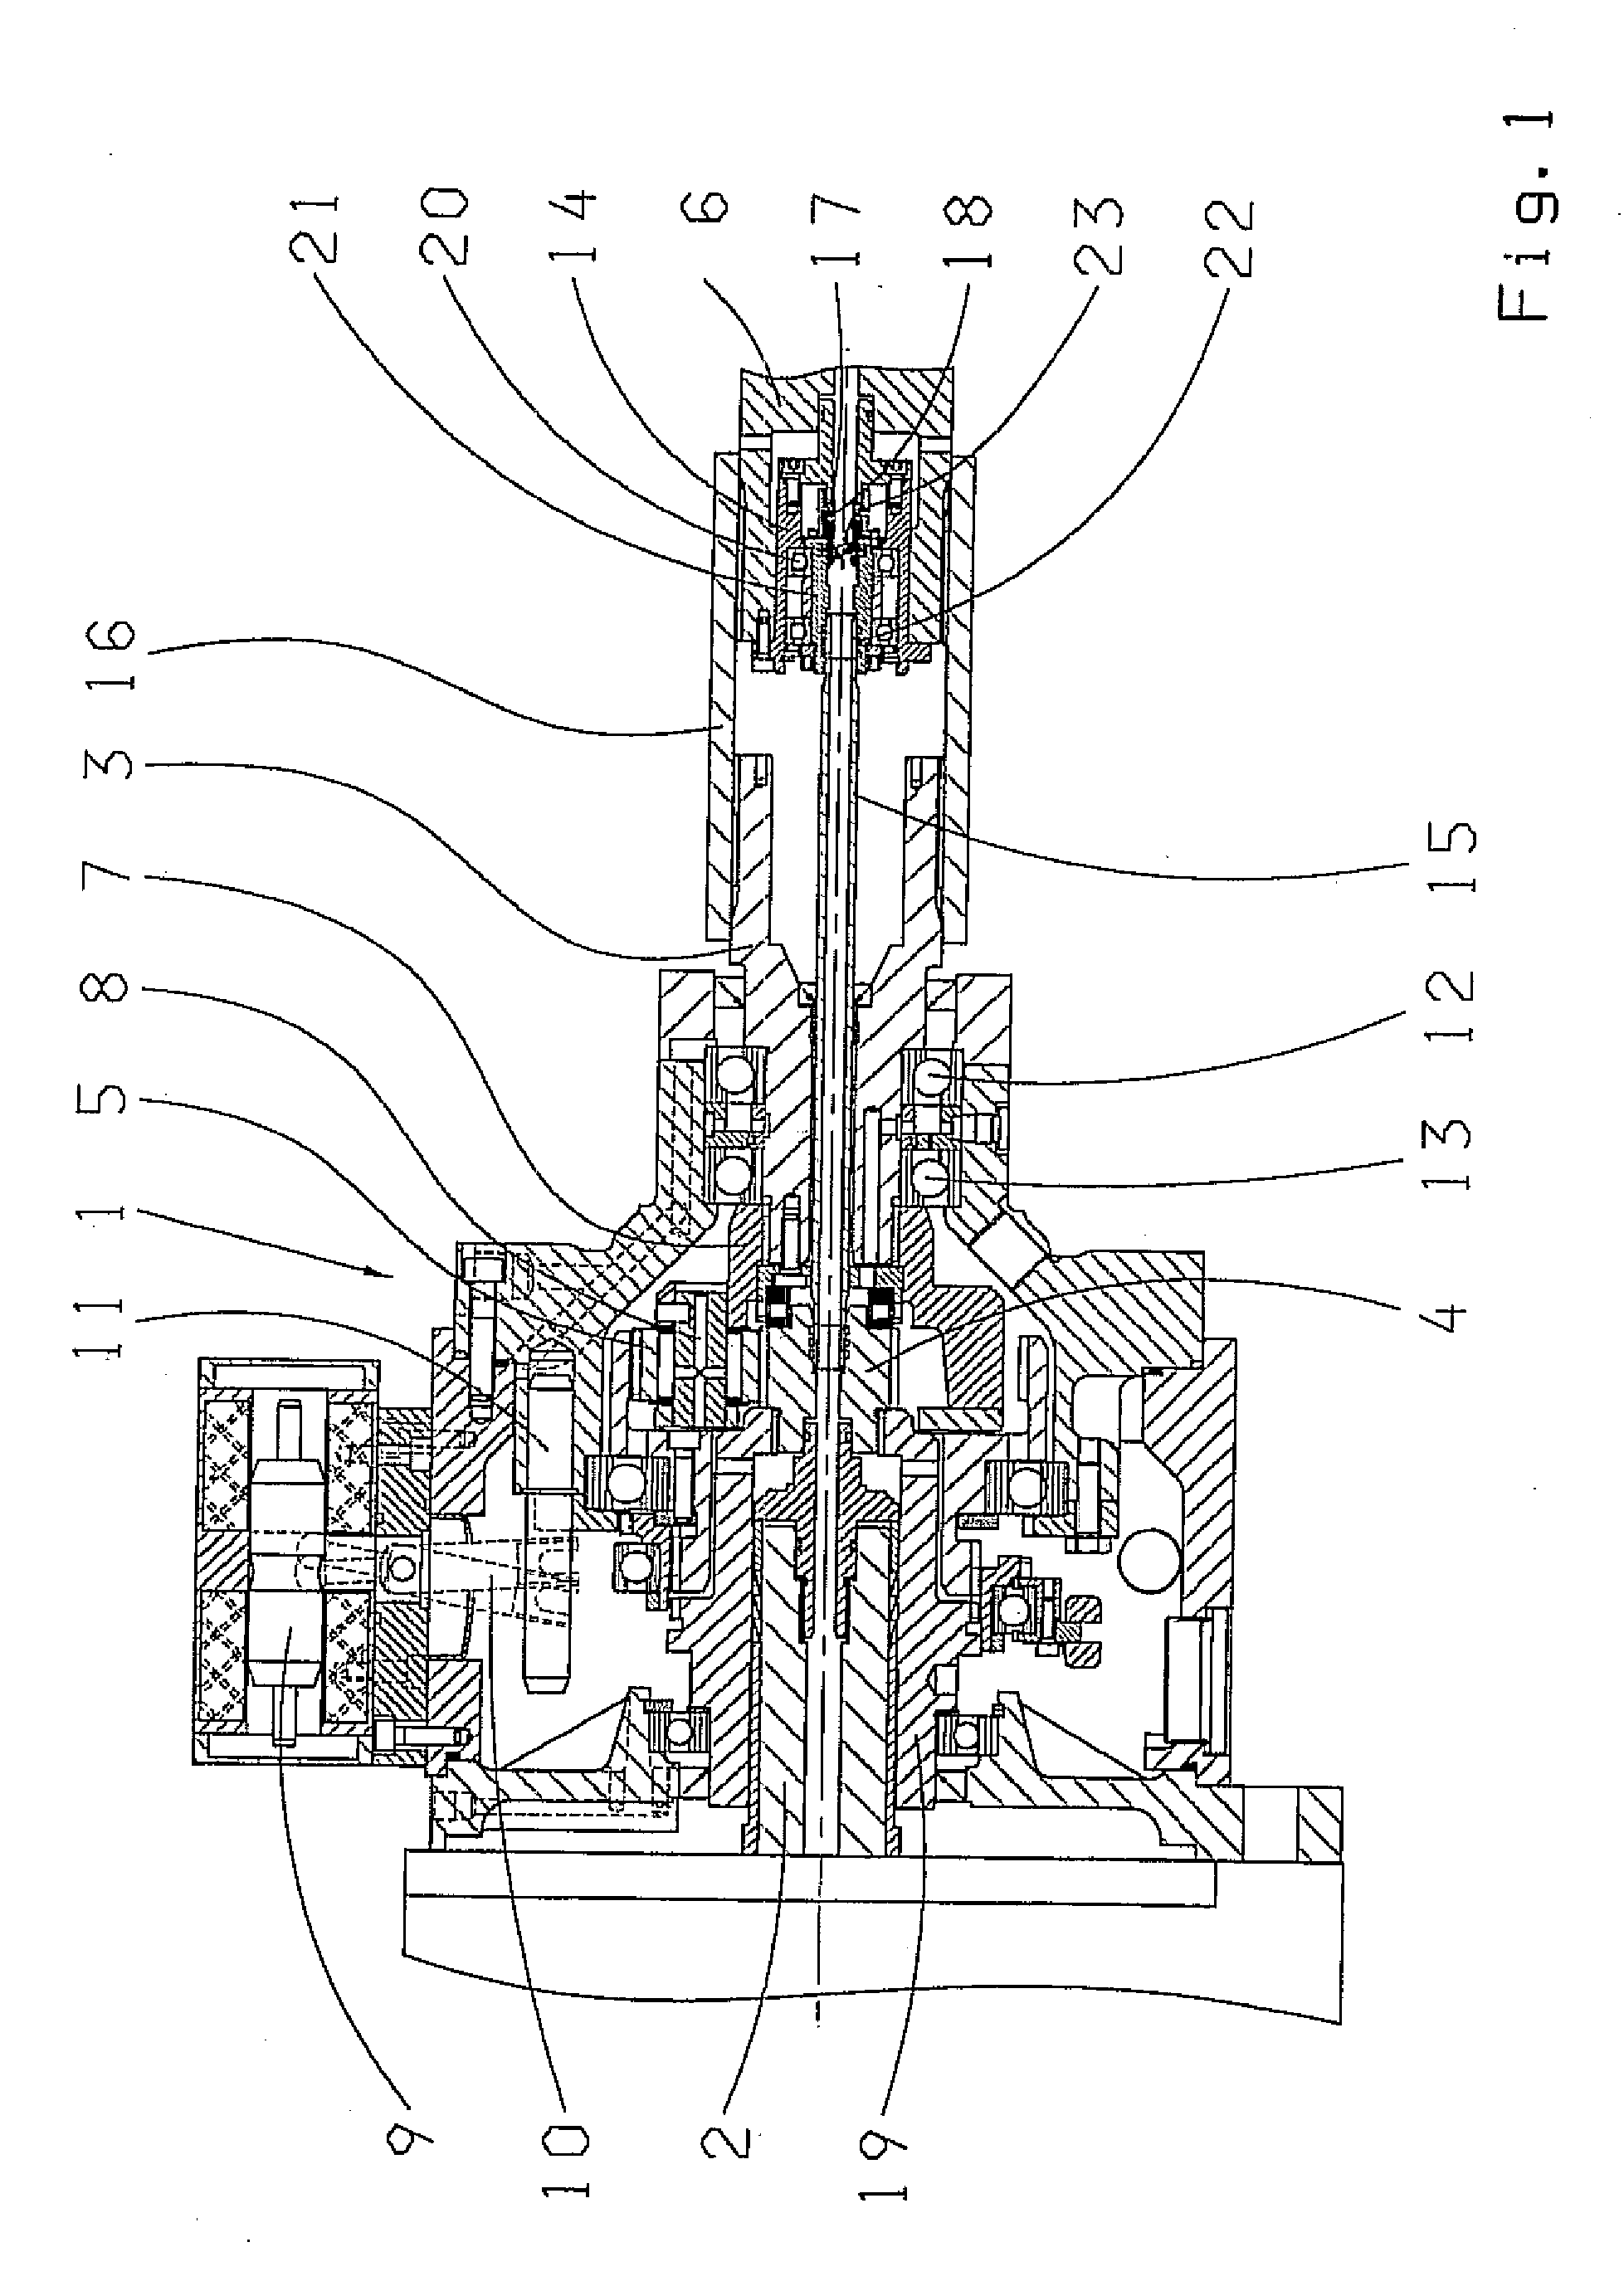 Machine Tool Comprising a Rotary Transmission Leadthrough Between the Driven Gear and the Spindle